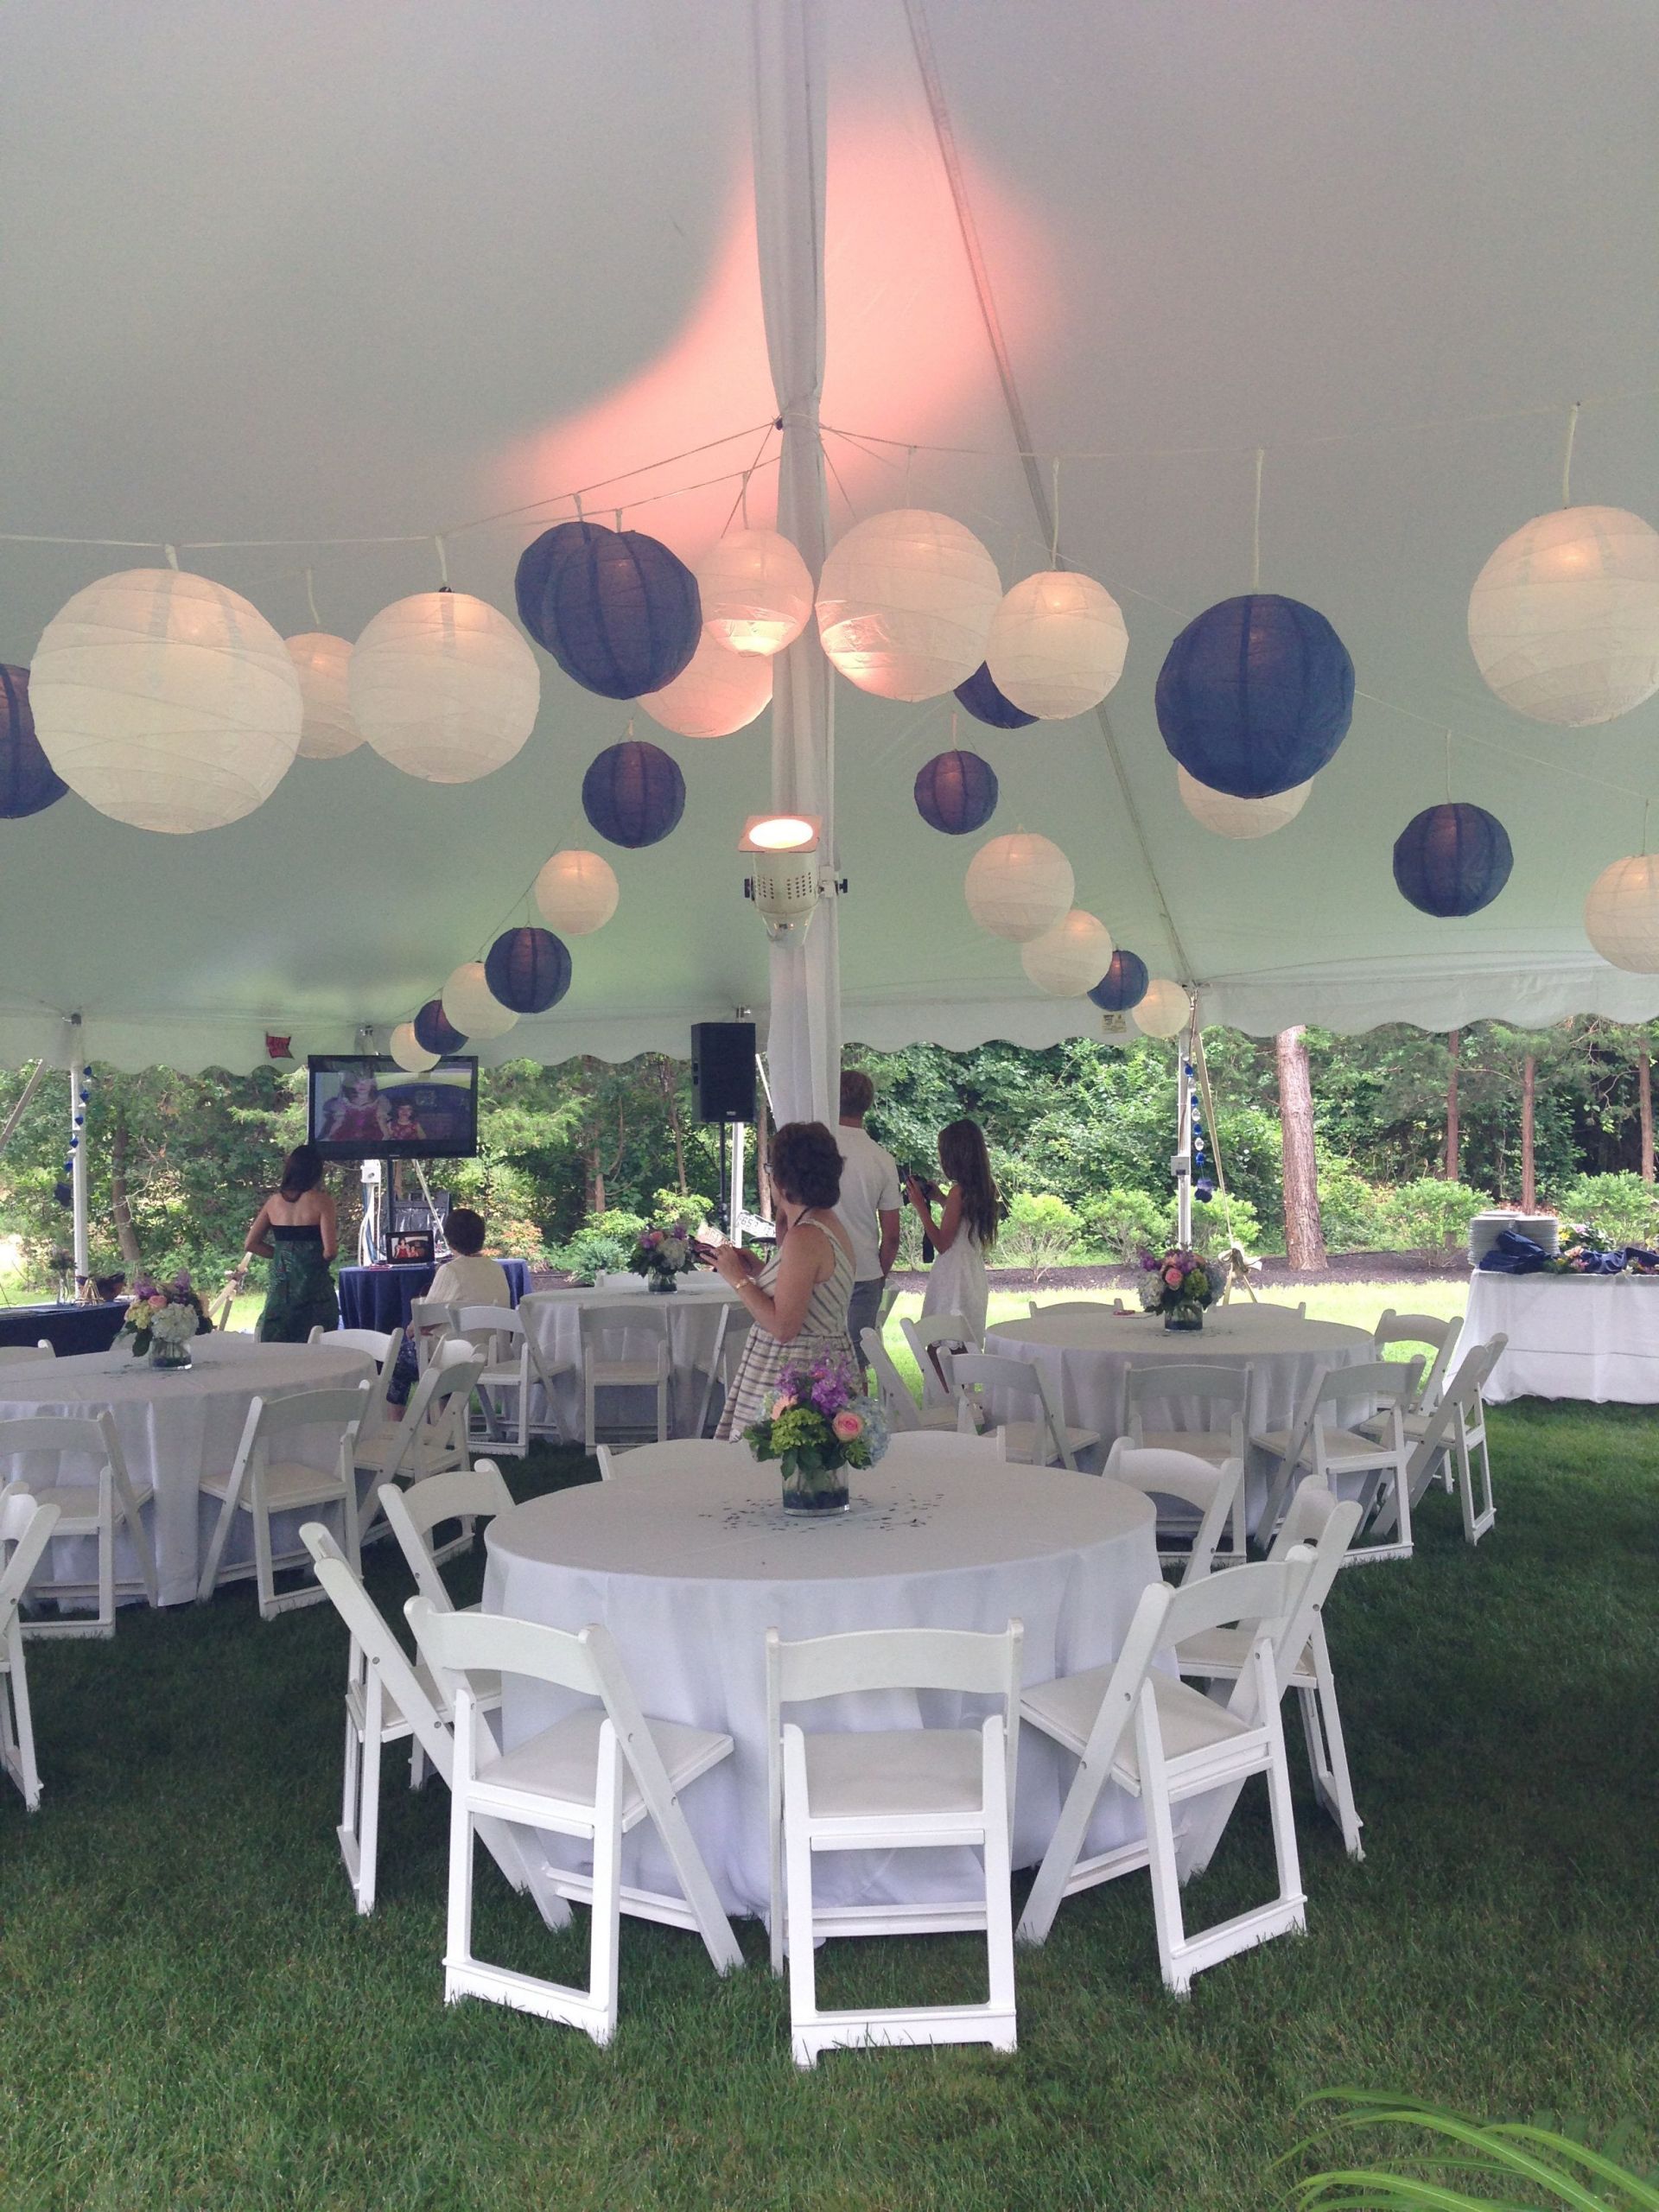 Graduation Garden Party Ideas
 Tented blue and white graduation party